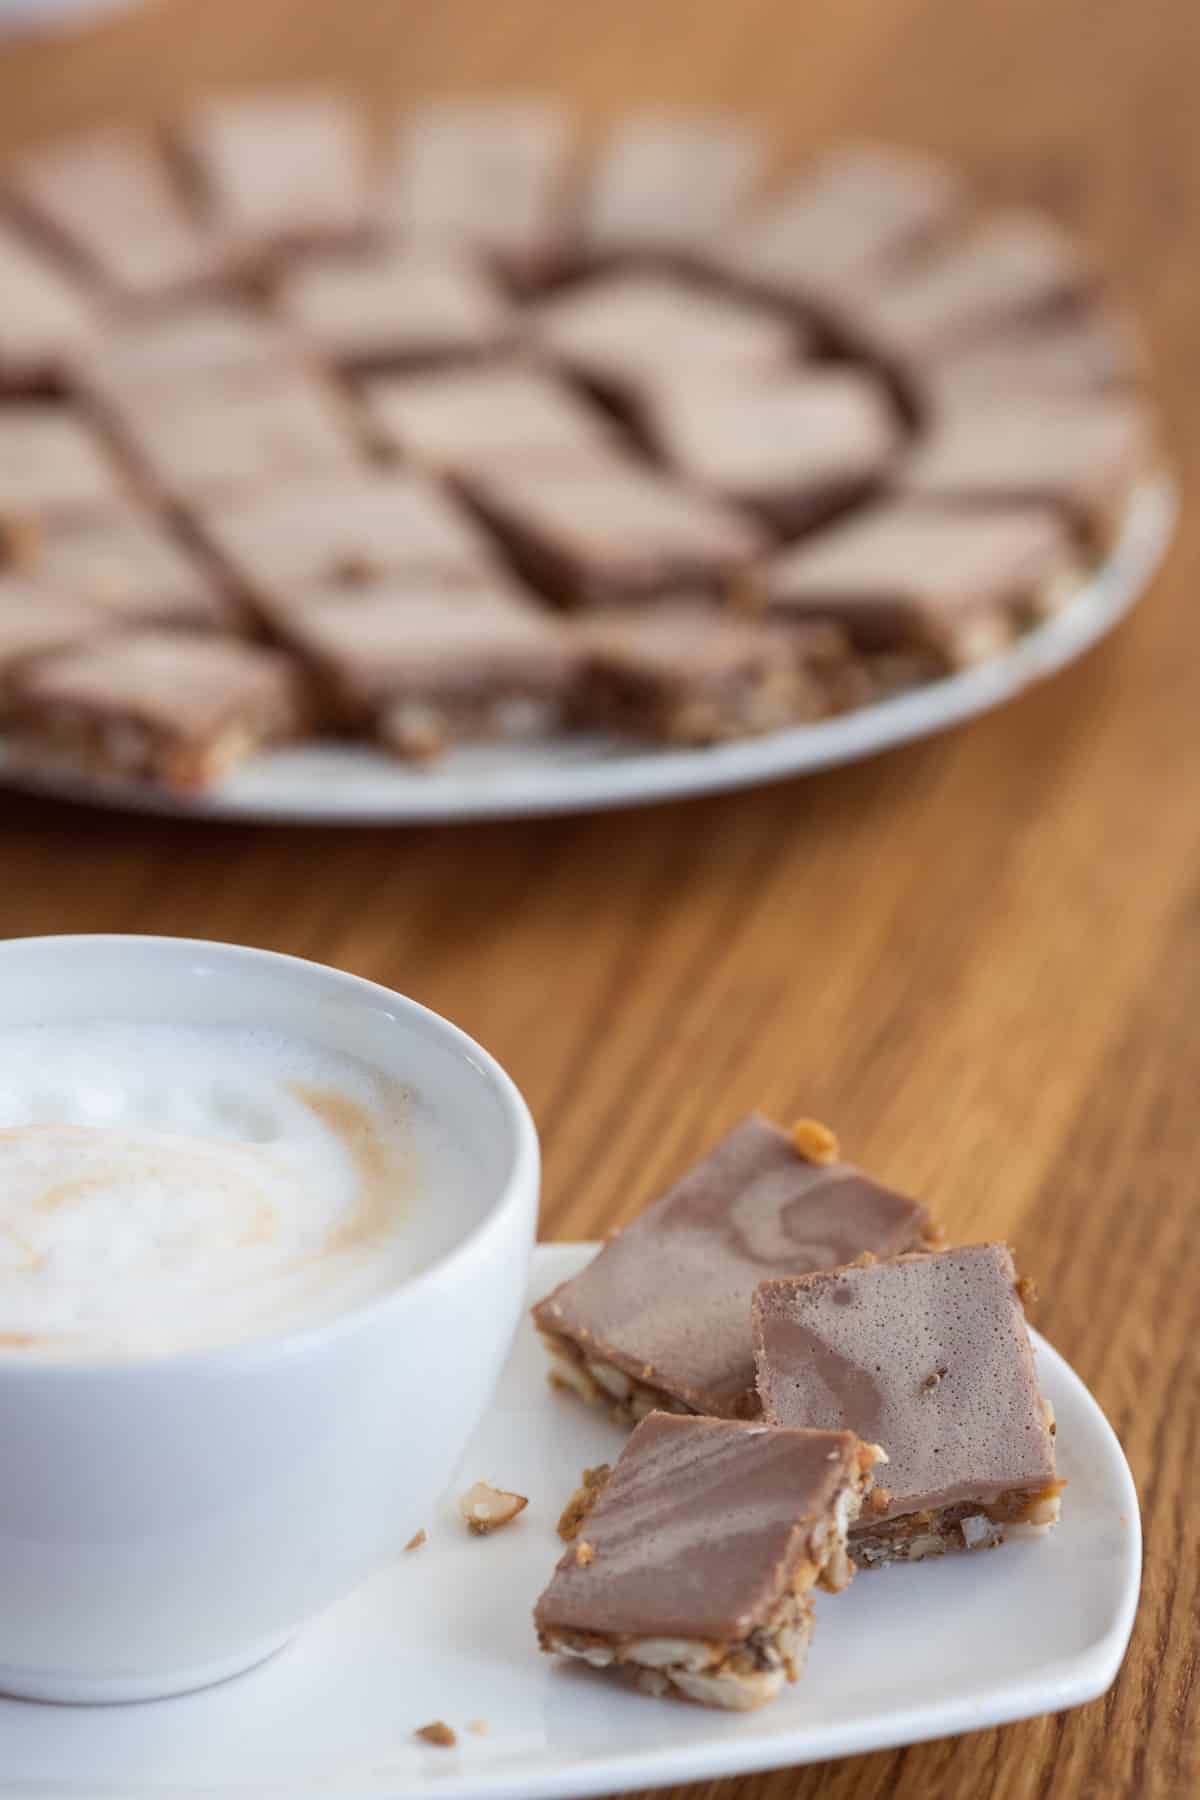 Cookies with nuts and chocolate on a plate besides a cup of coffee.